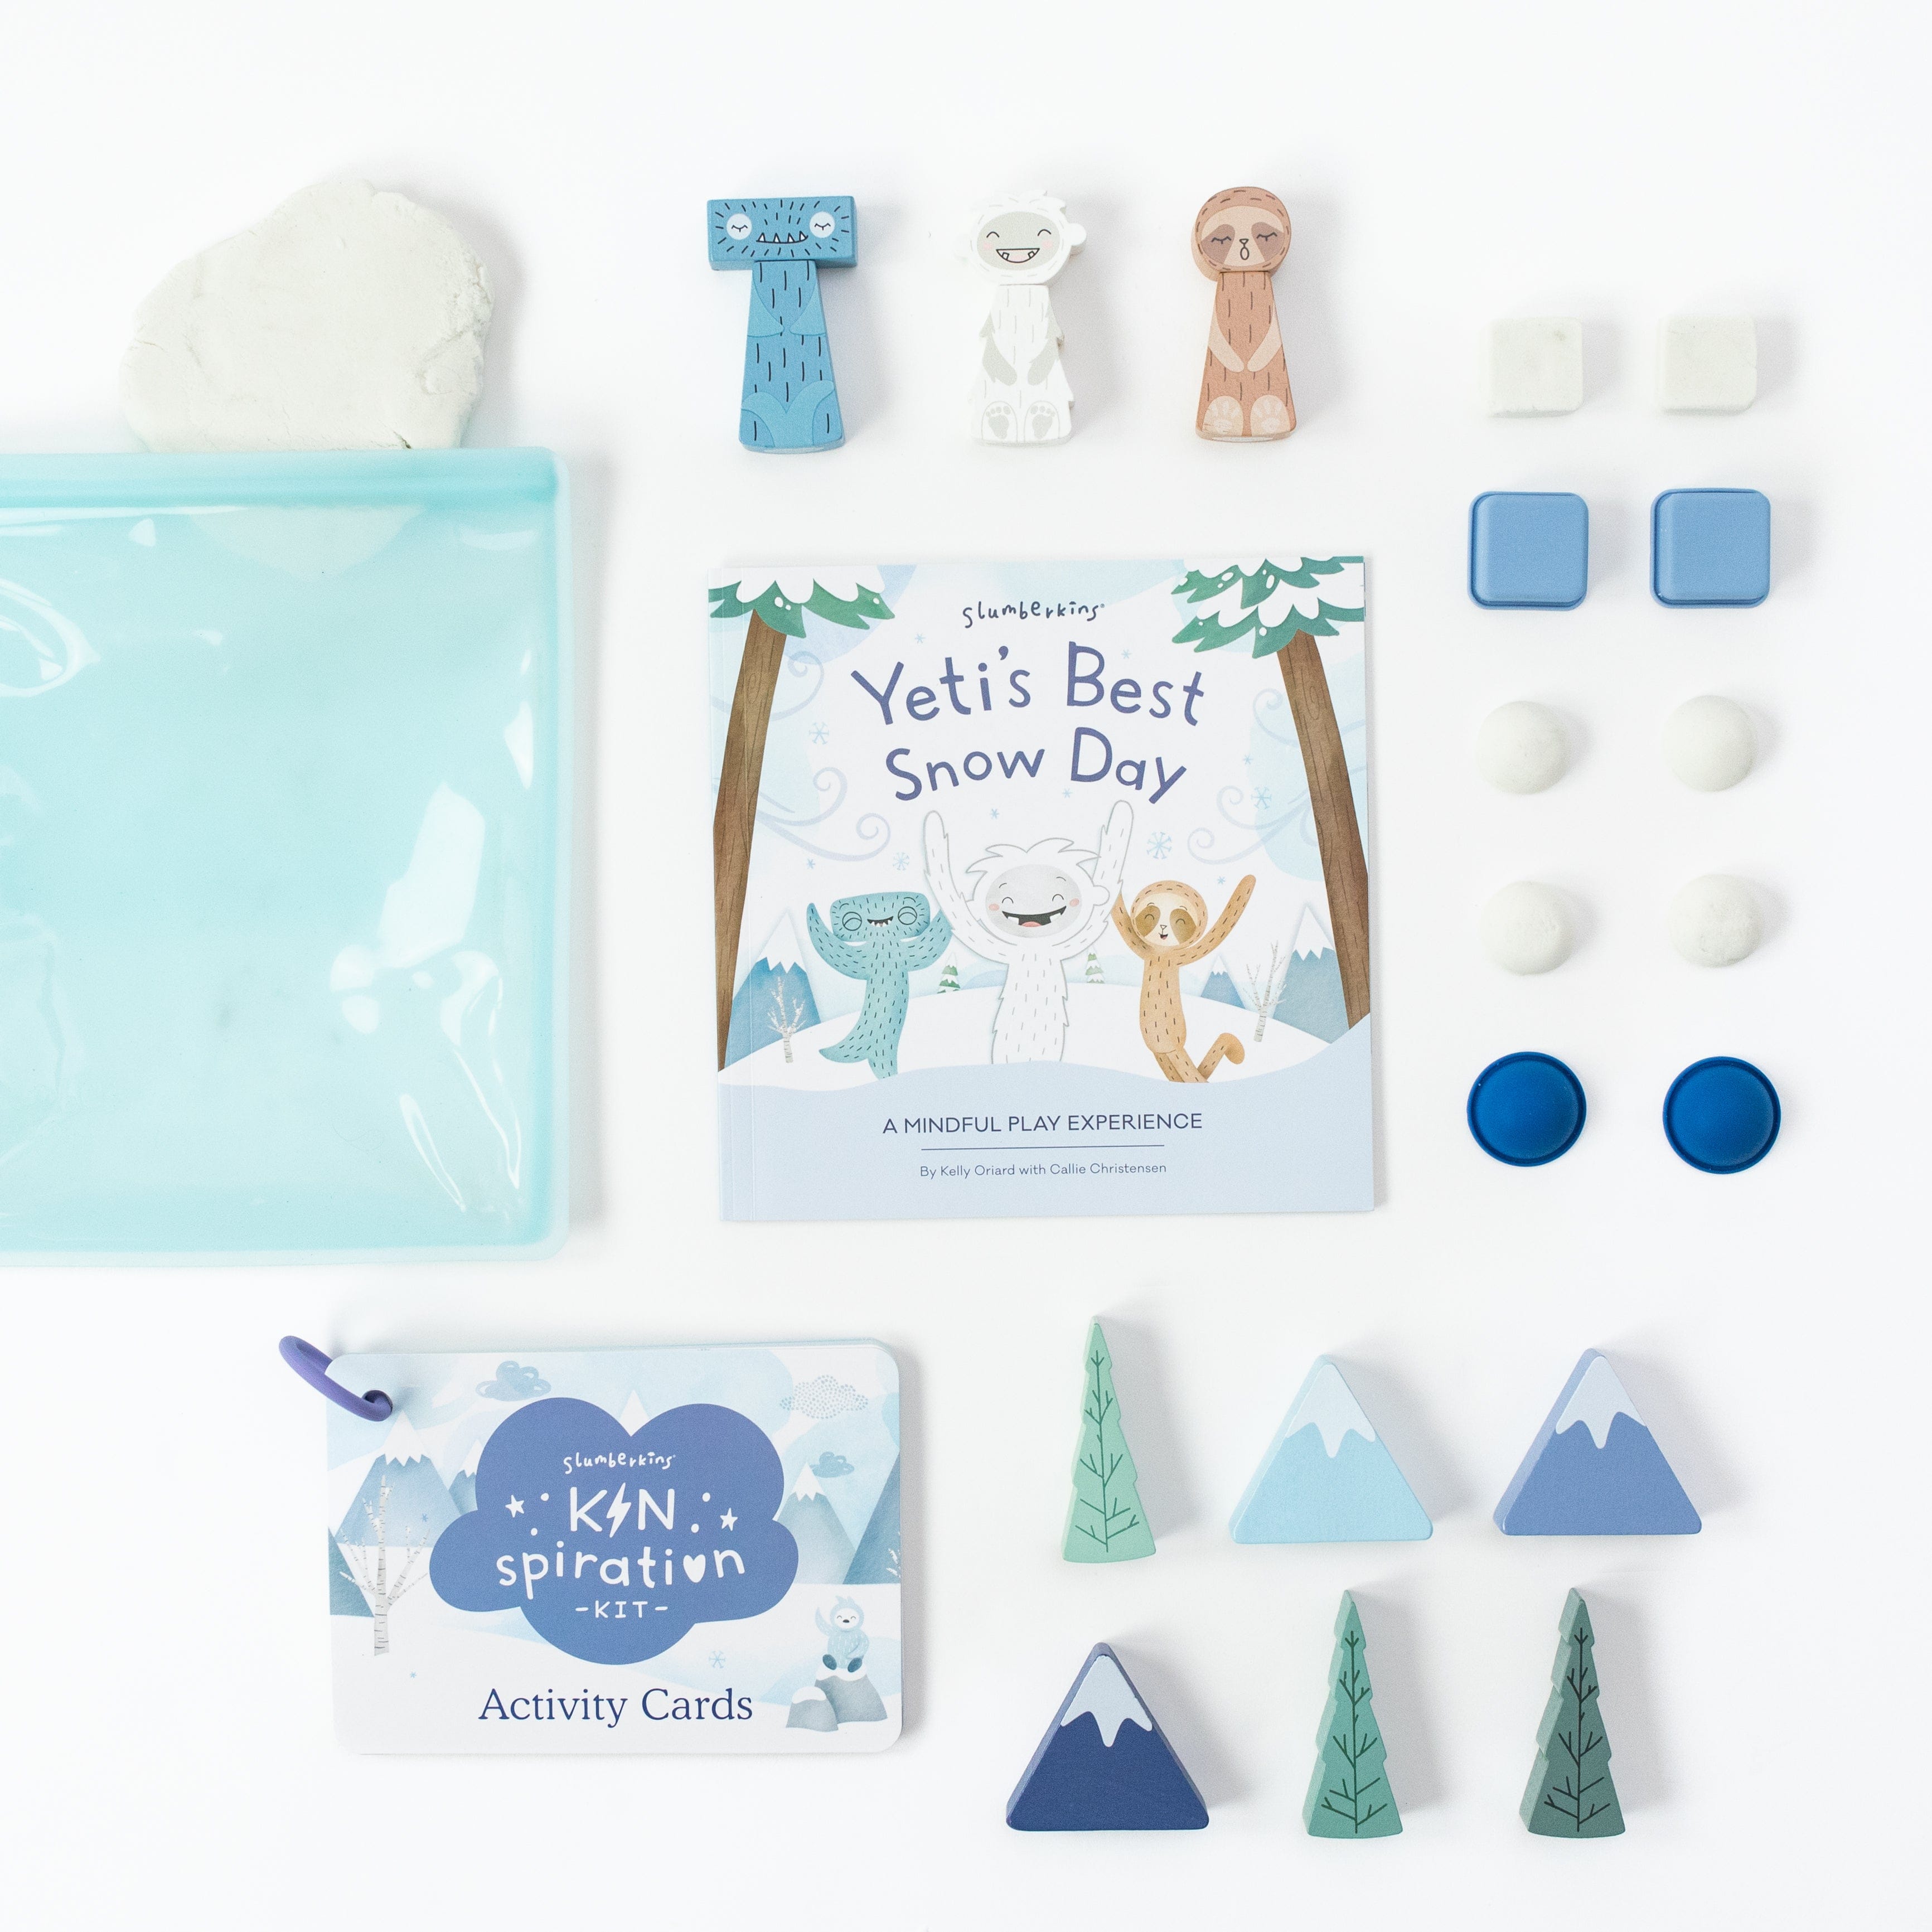 Kit 1: Mindful Play with Yeti - View Product